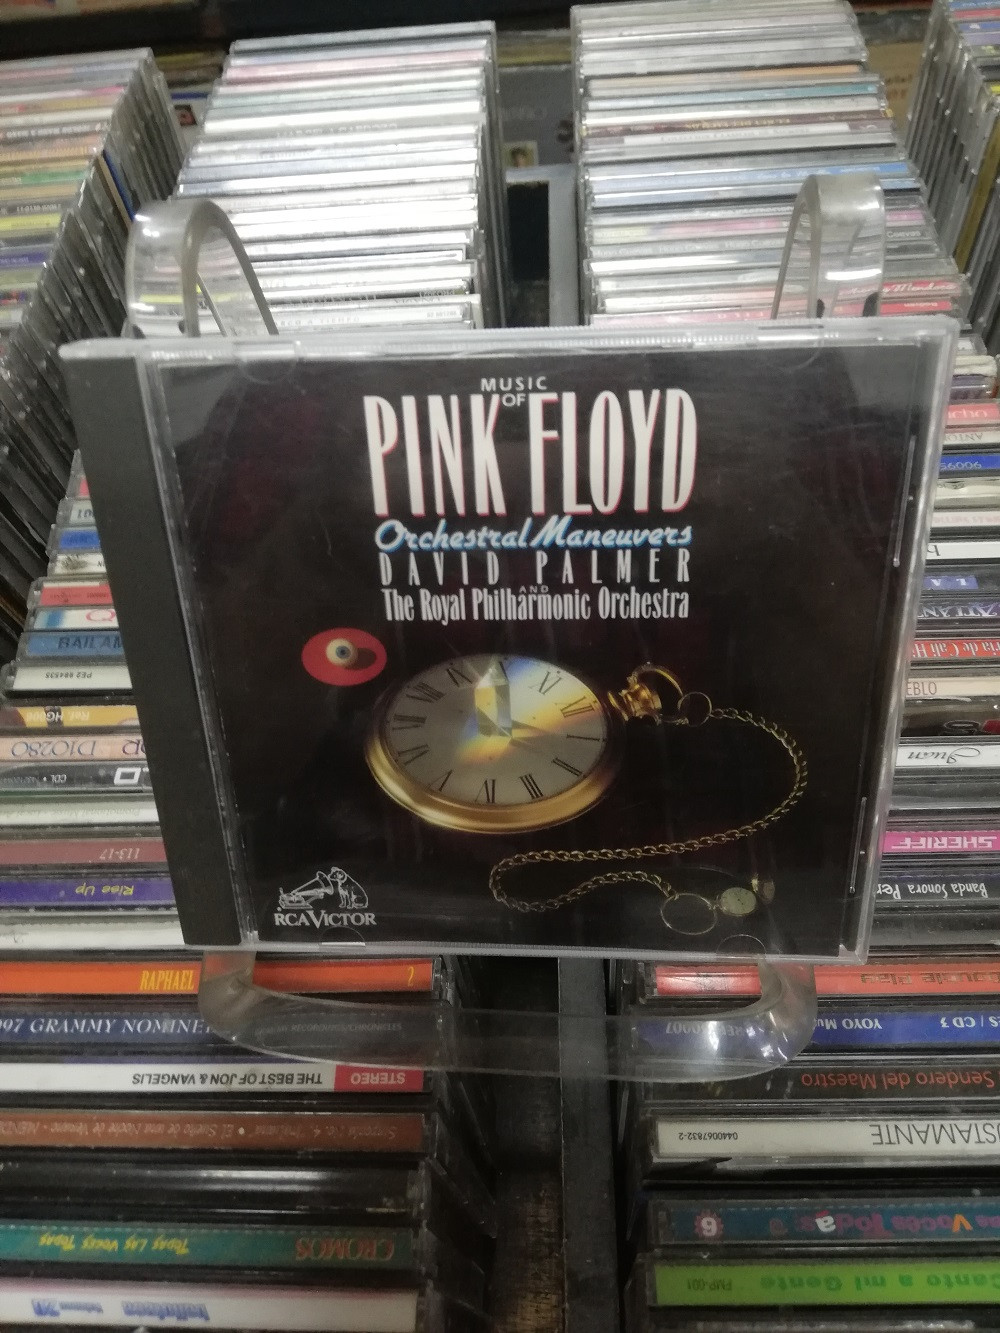 Imagen CD MUSIC OF PINK FLOYD - ORCHESTRAL MANEUVERS/DAVID PALMER/THE ROYAL PHILHARMONIC ORCHESTRA